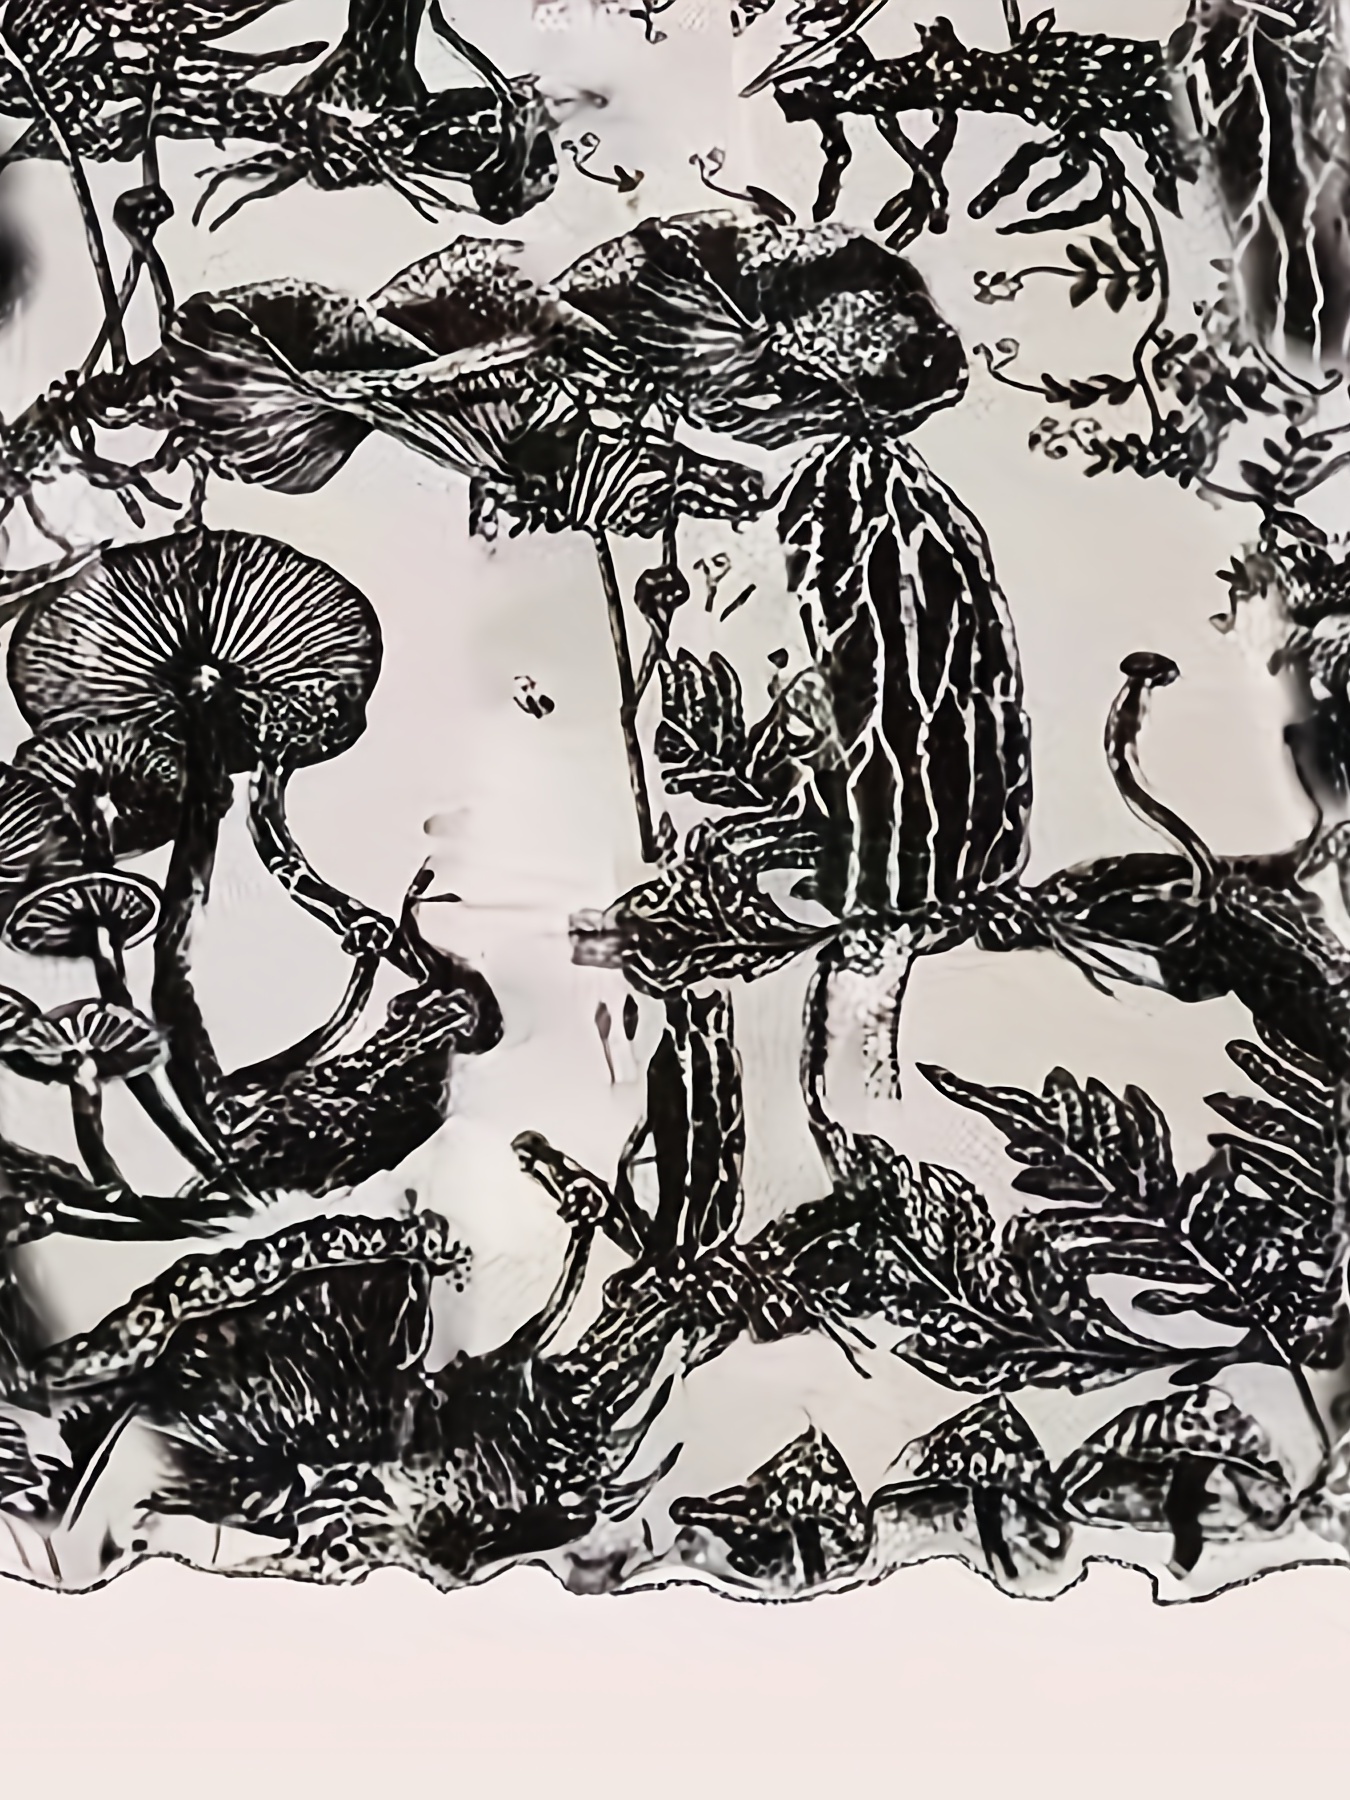 I can't get over how beautiful these linocut prints of mushrooms